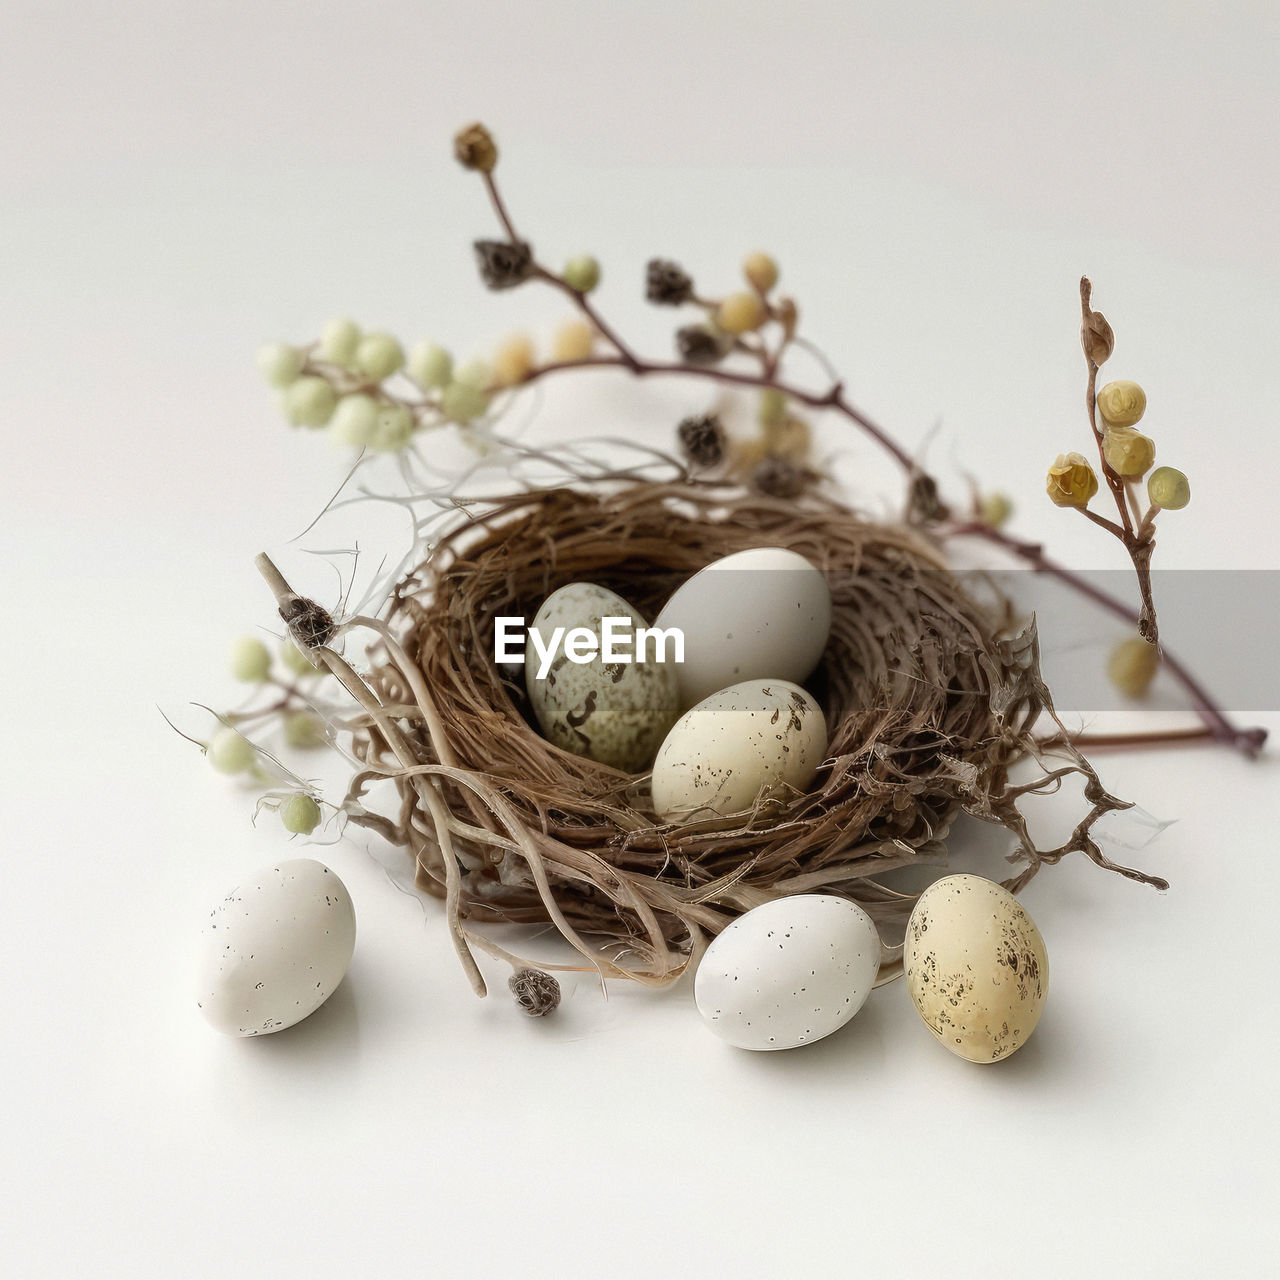 Eggs in a nest, easter eggs, nest, subdued colors, neutral white background, cozy, minimalism